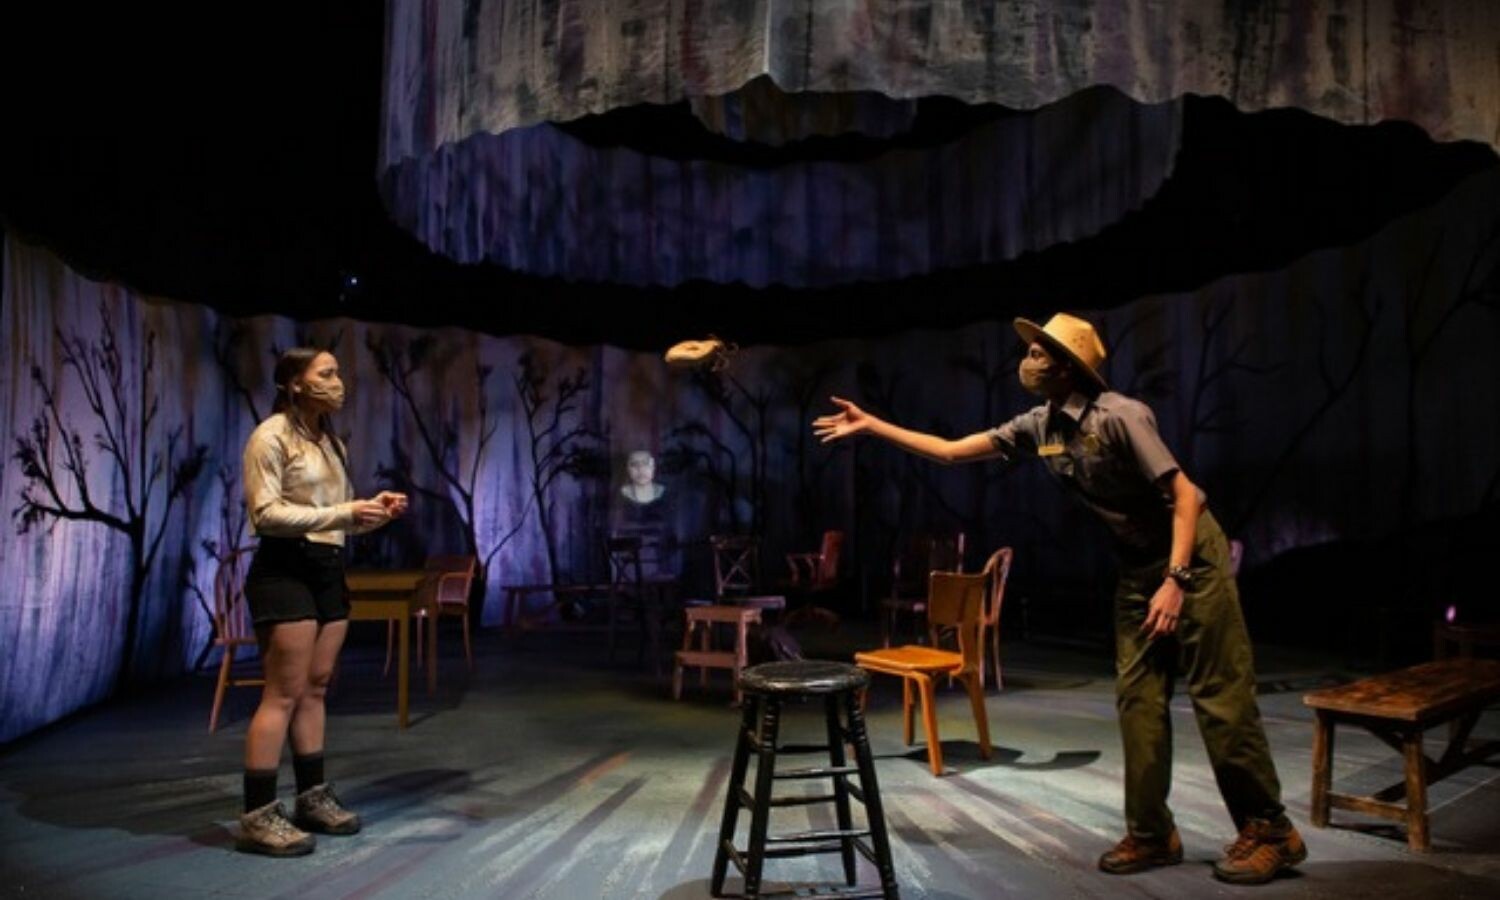 A man reaching out to a woman from whom he's distanced. Both are surrounded by chairs and the onstage "woods".